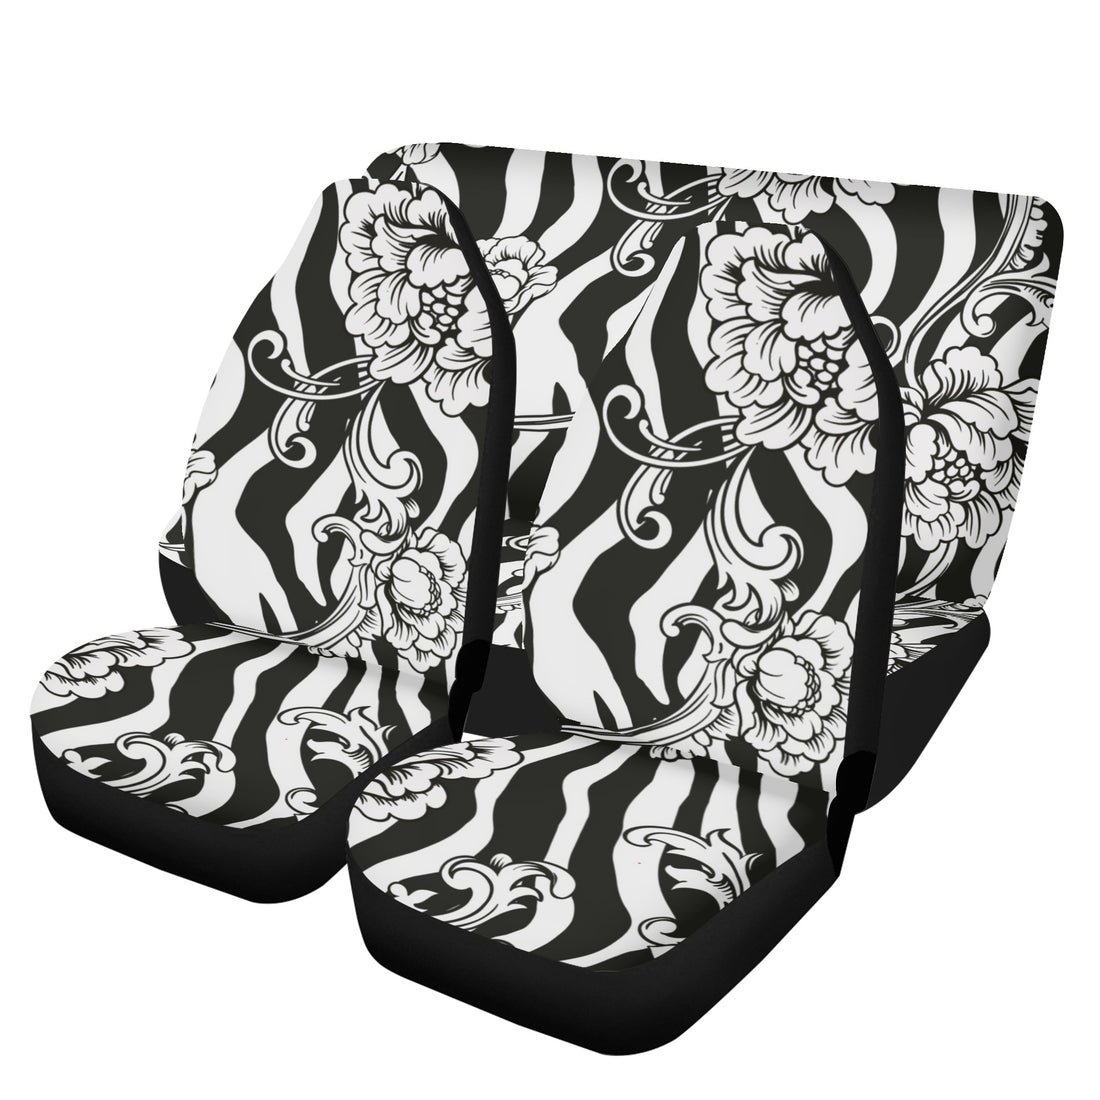 Car Seat Cover Set roses decoration black and white Home-clothes-jewelry